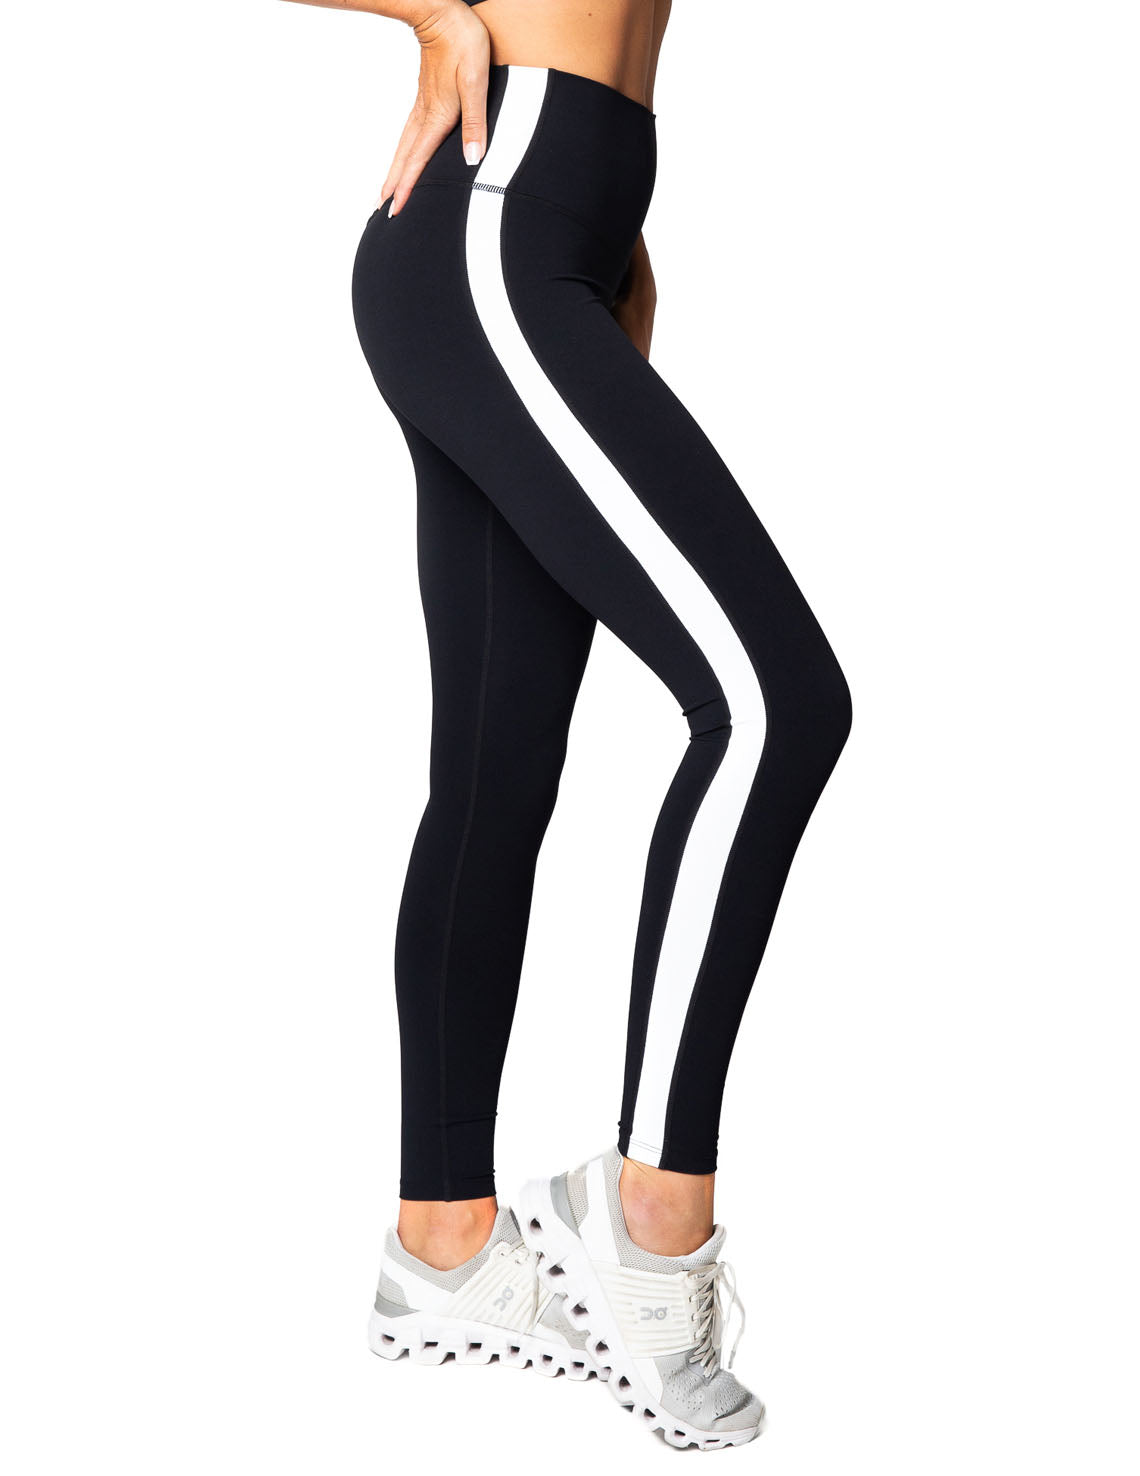 Black & White Striped Relaxed Leggings Manufacturer in USA